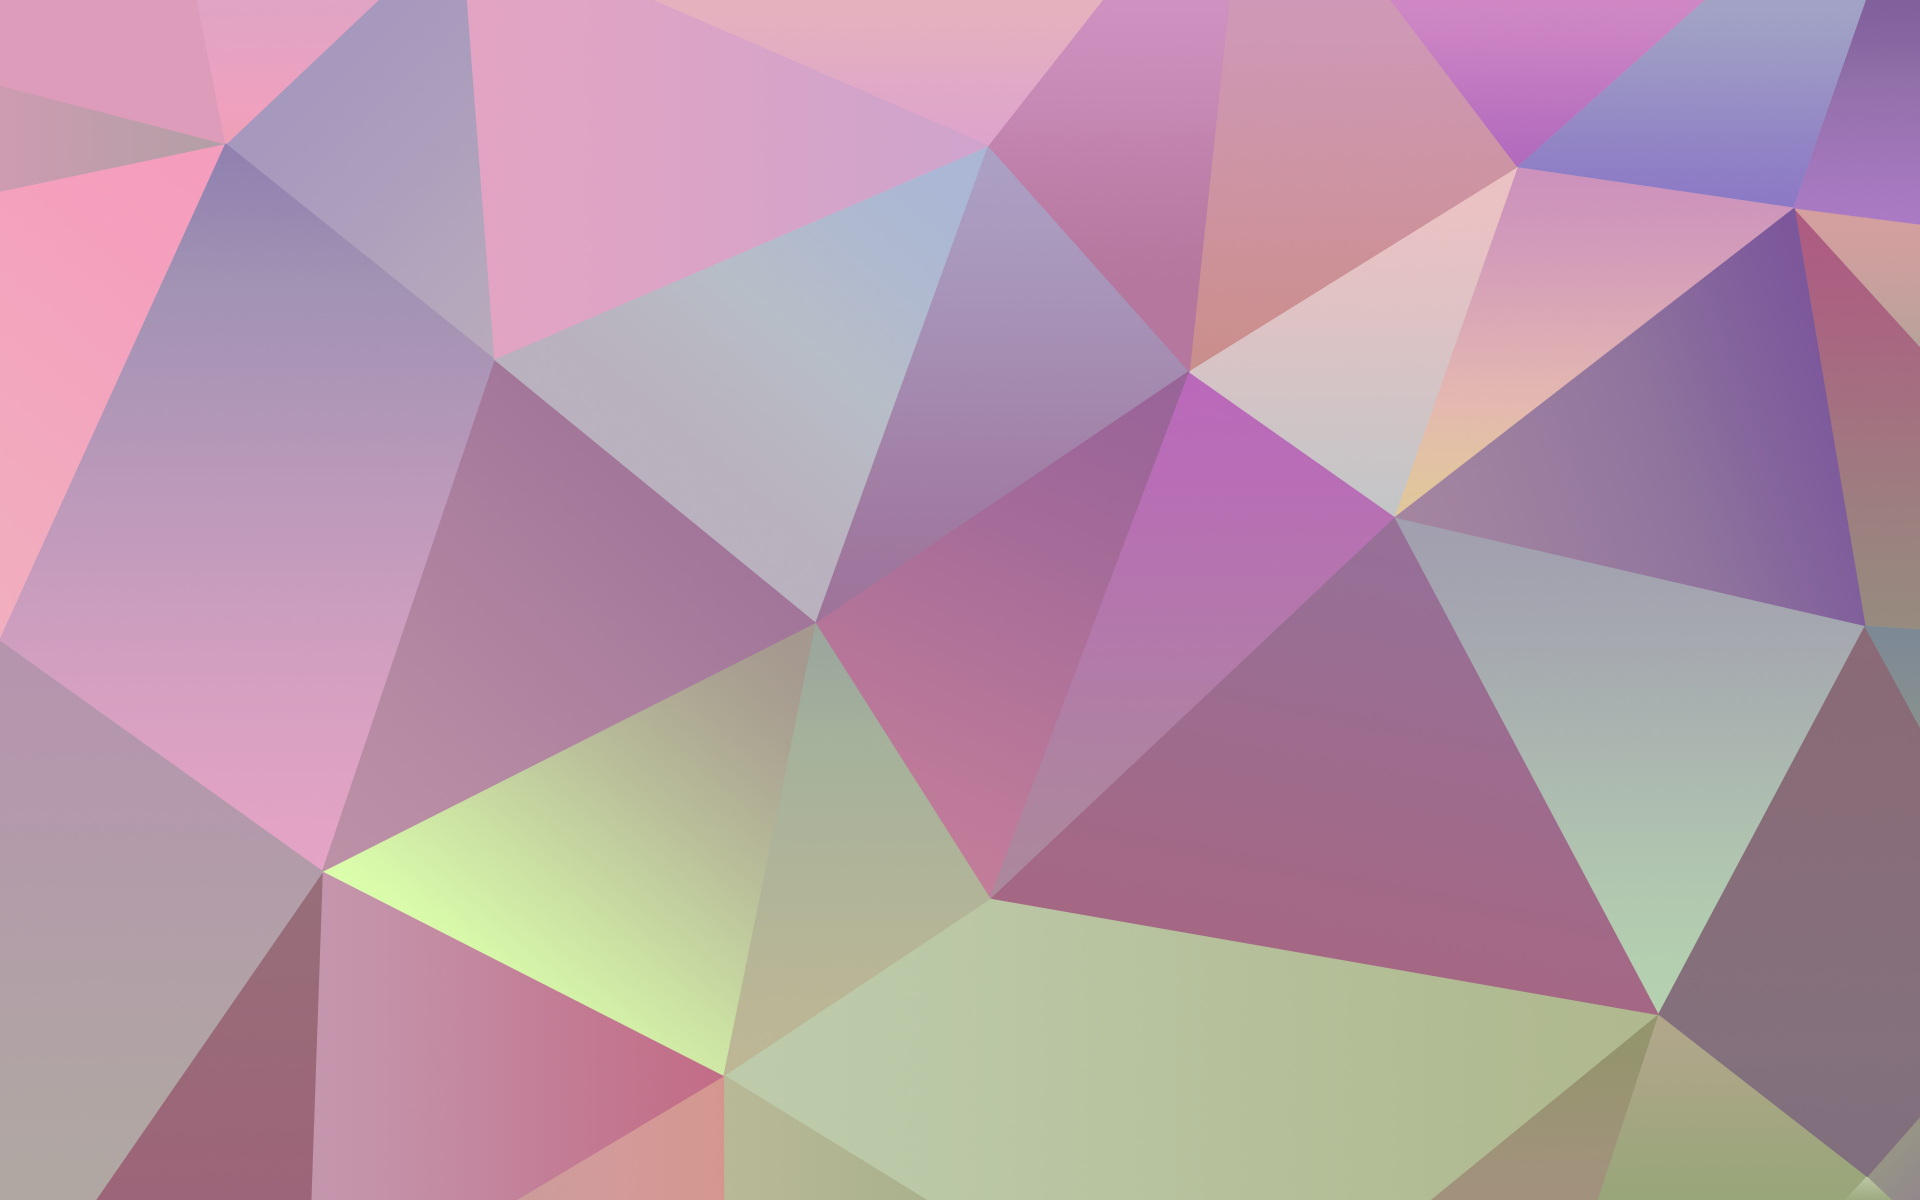 clean, Bean, candy, triangles, , minimalistic, simple, abstract, jelly